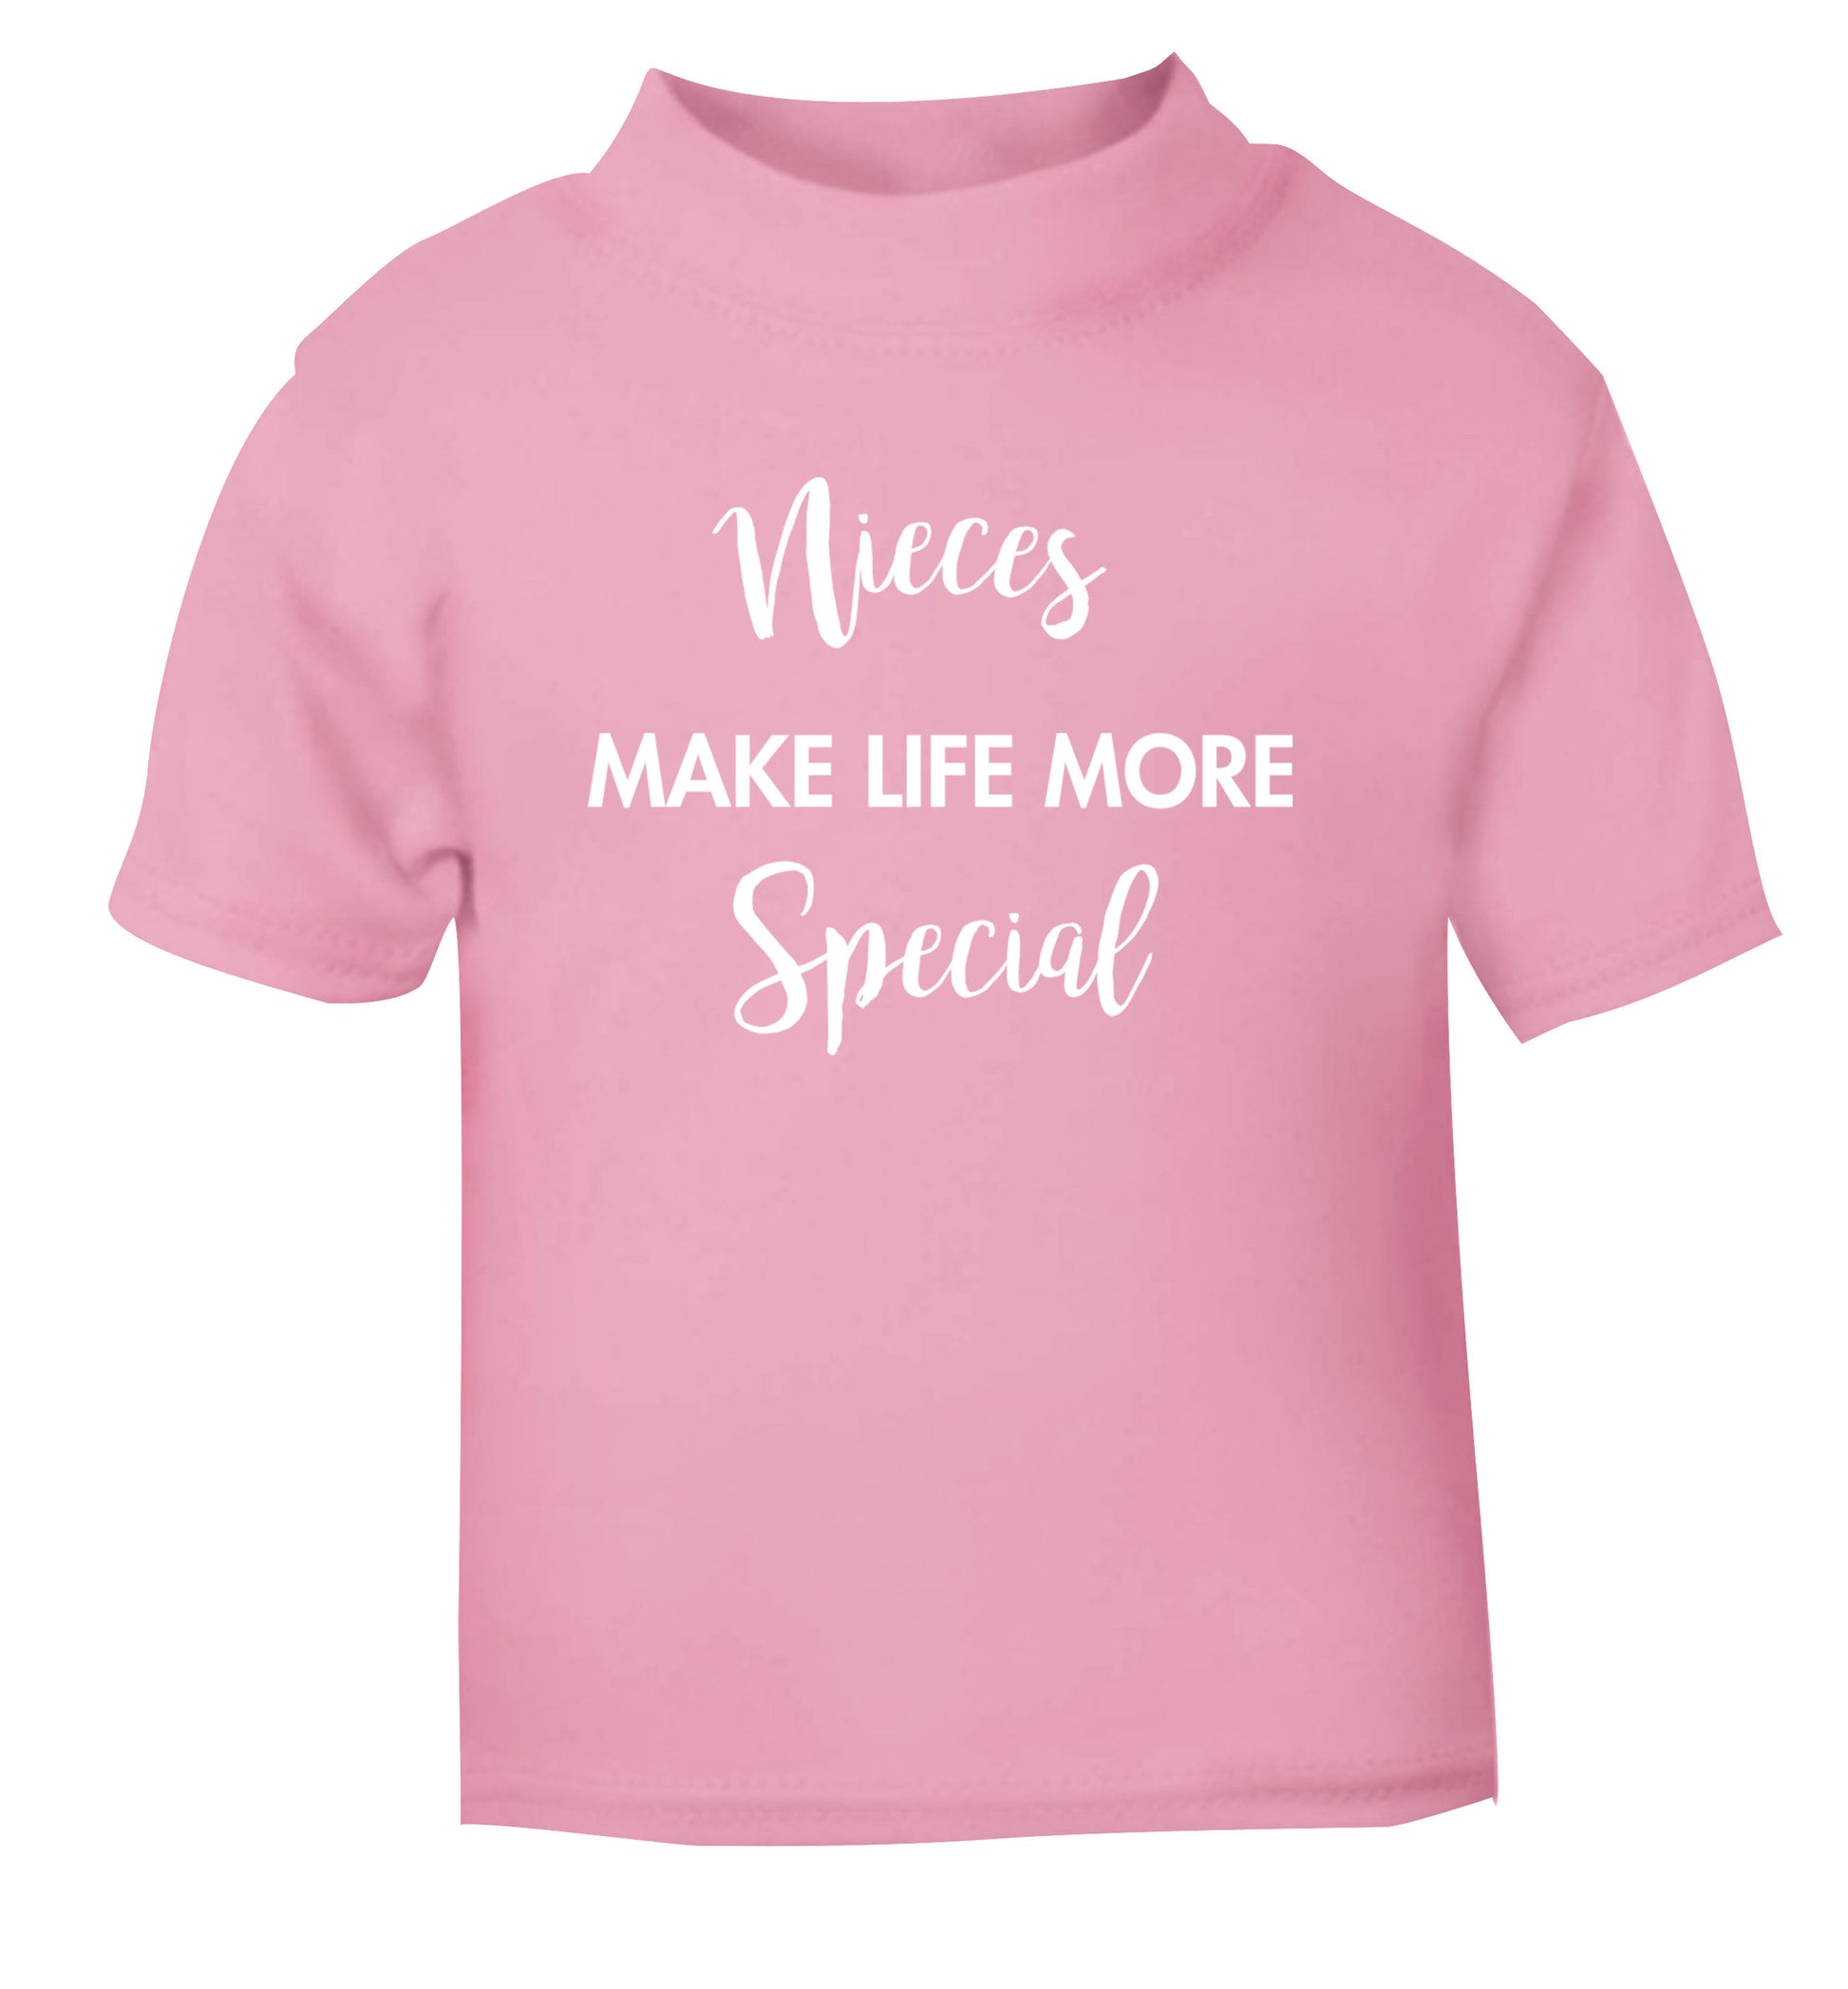 Nieces make life more special light pink Baby Toddler Tshirt 2 Years